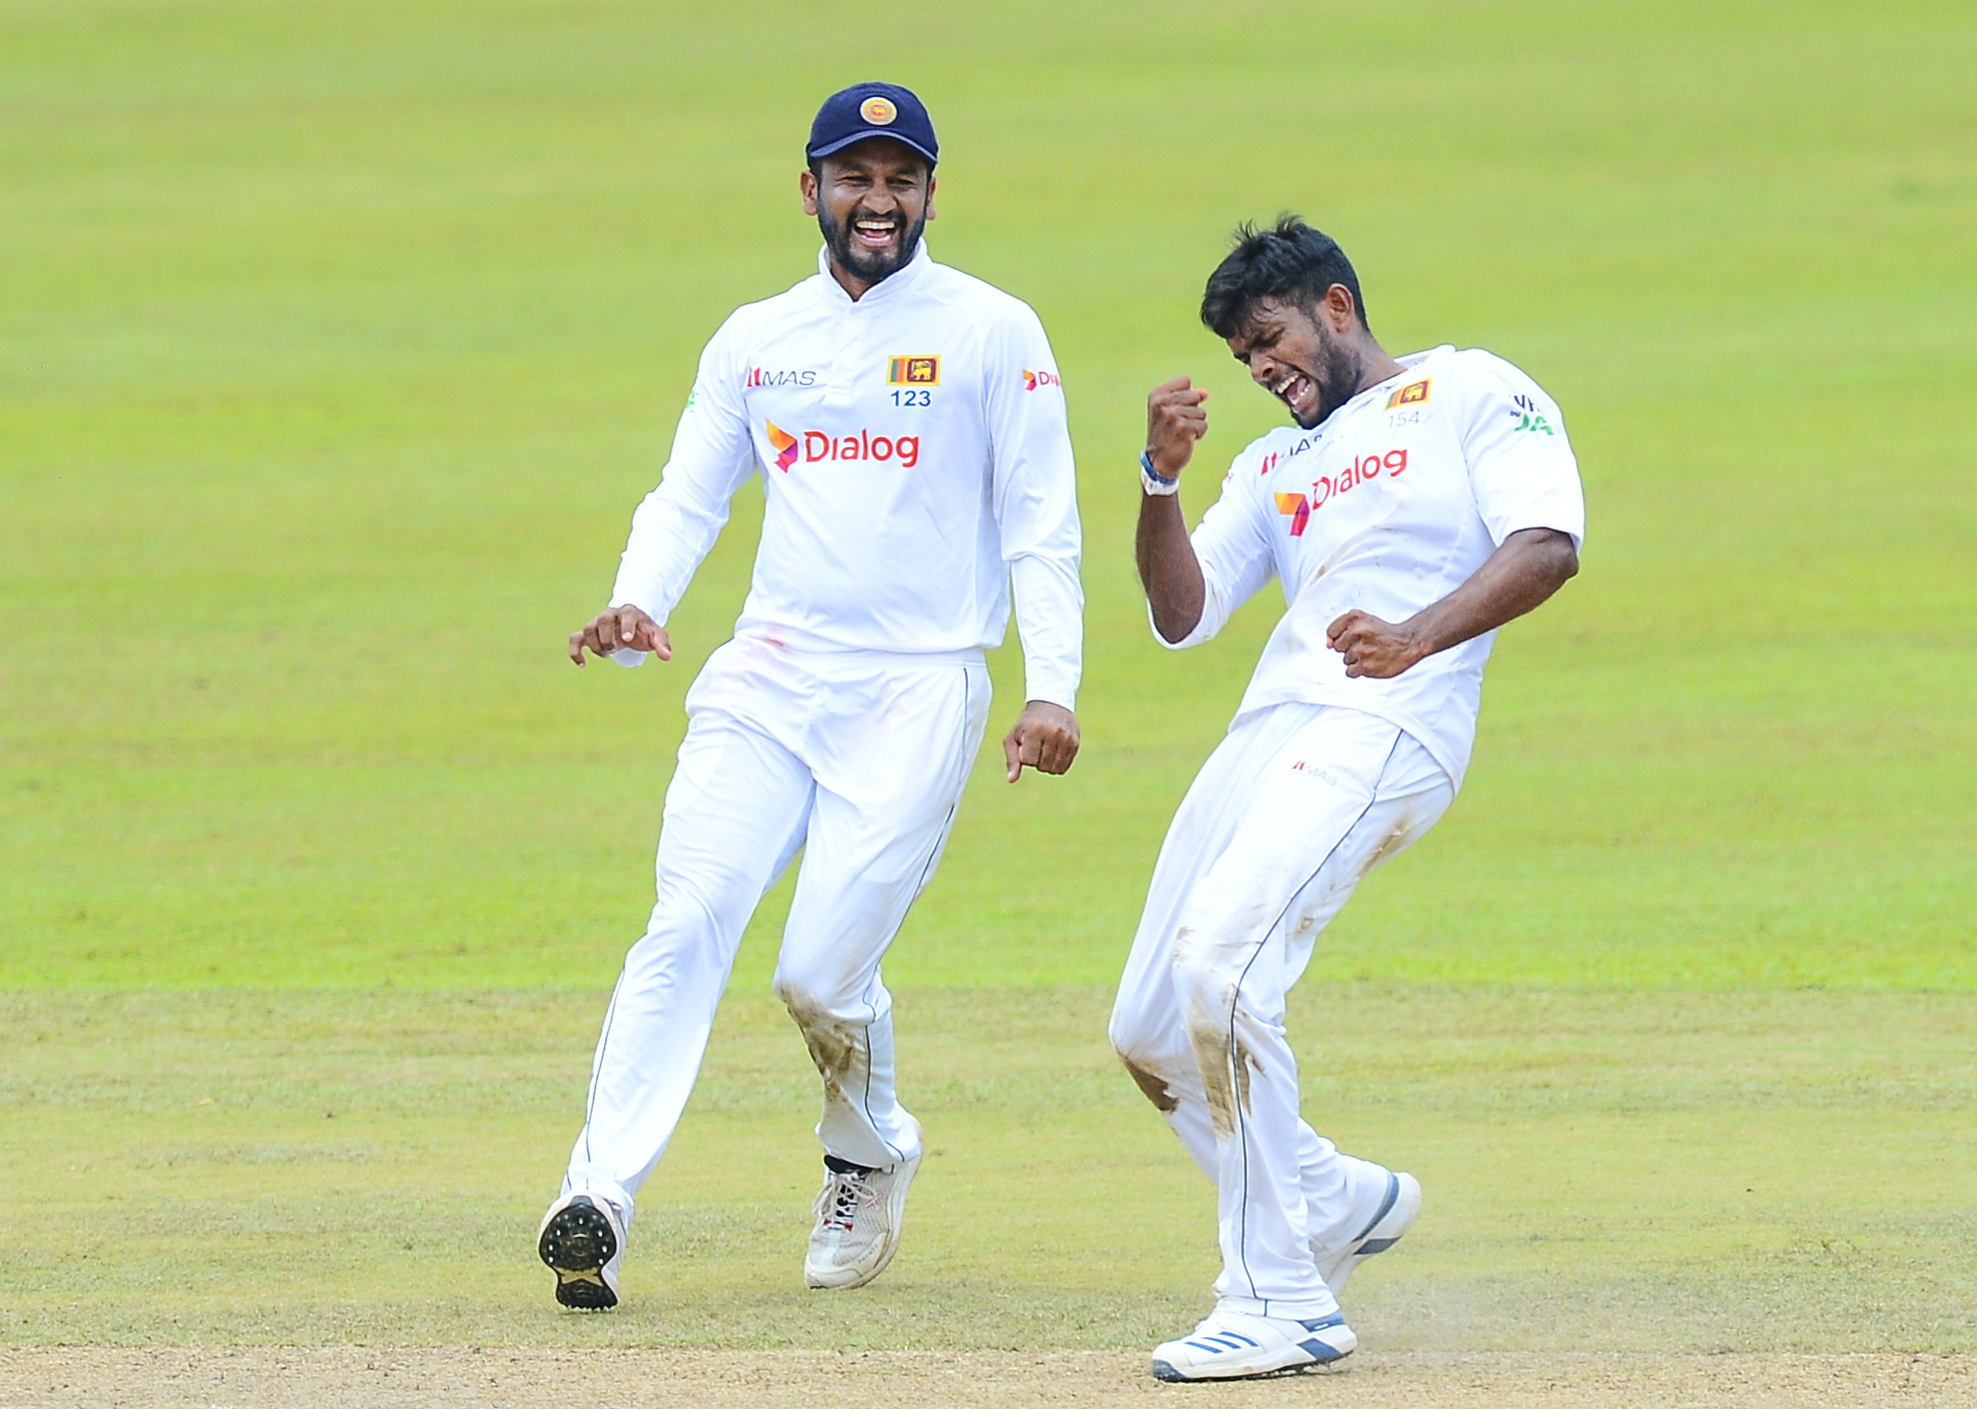 Ramesh Mendis has infused depth to Sri Lanka’s spin bowling depth besides batting ability